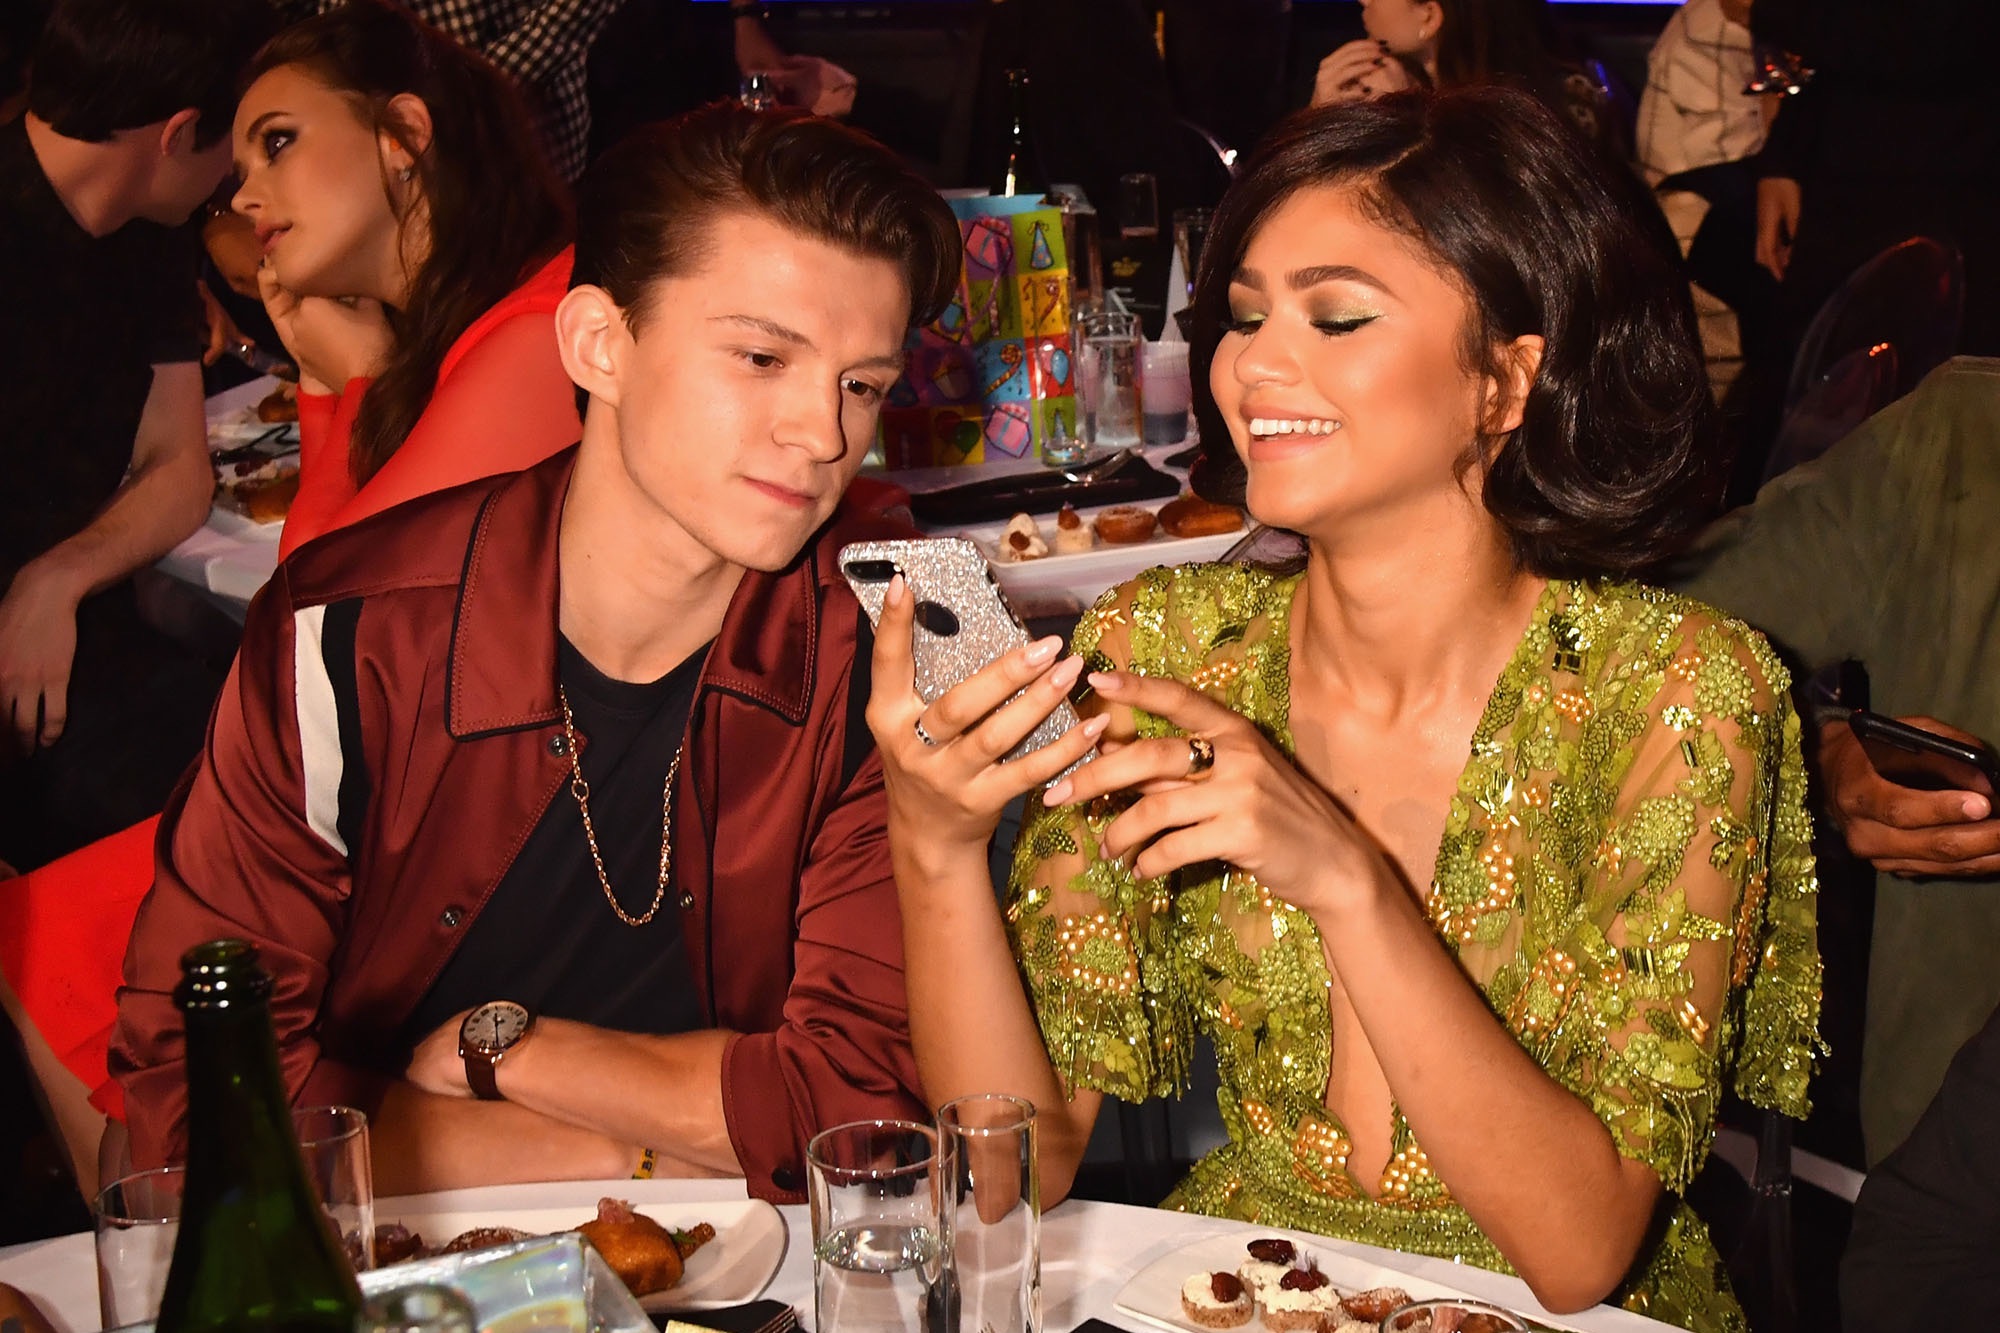 Tom Holland and Zendaya together watching a instagram post.